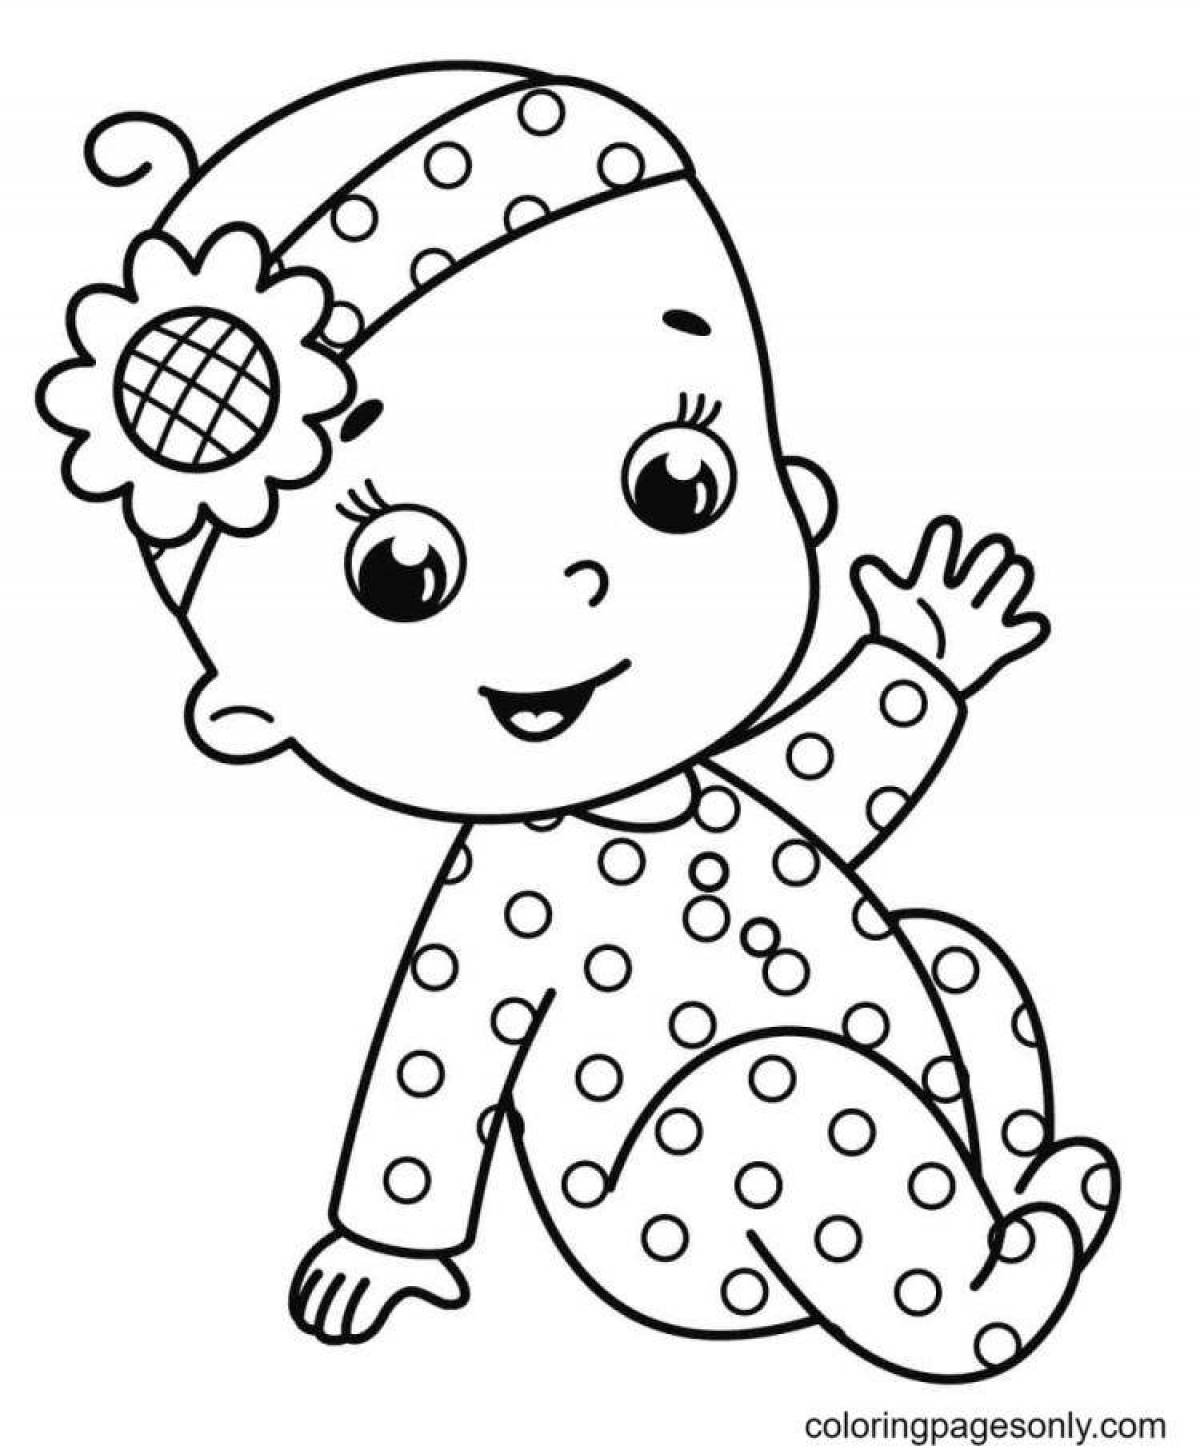 Coloring page violent charan baby